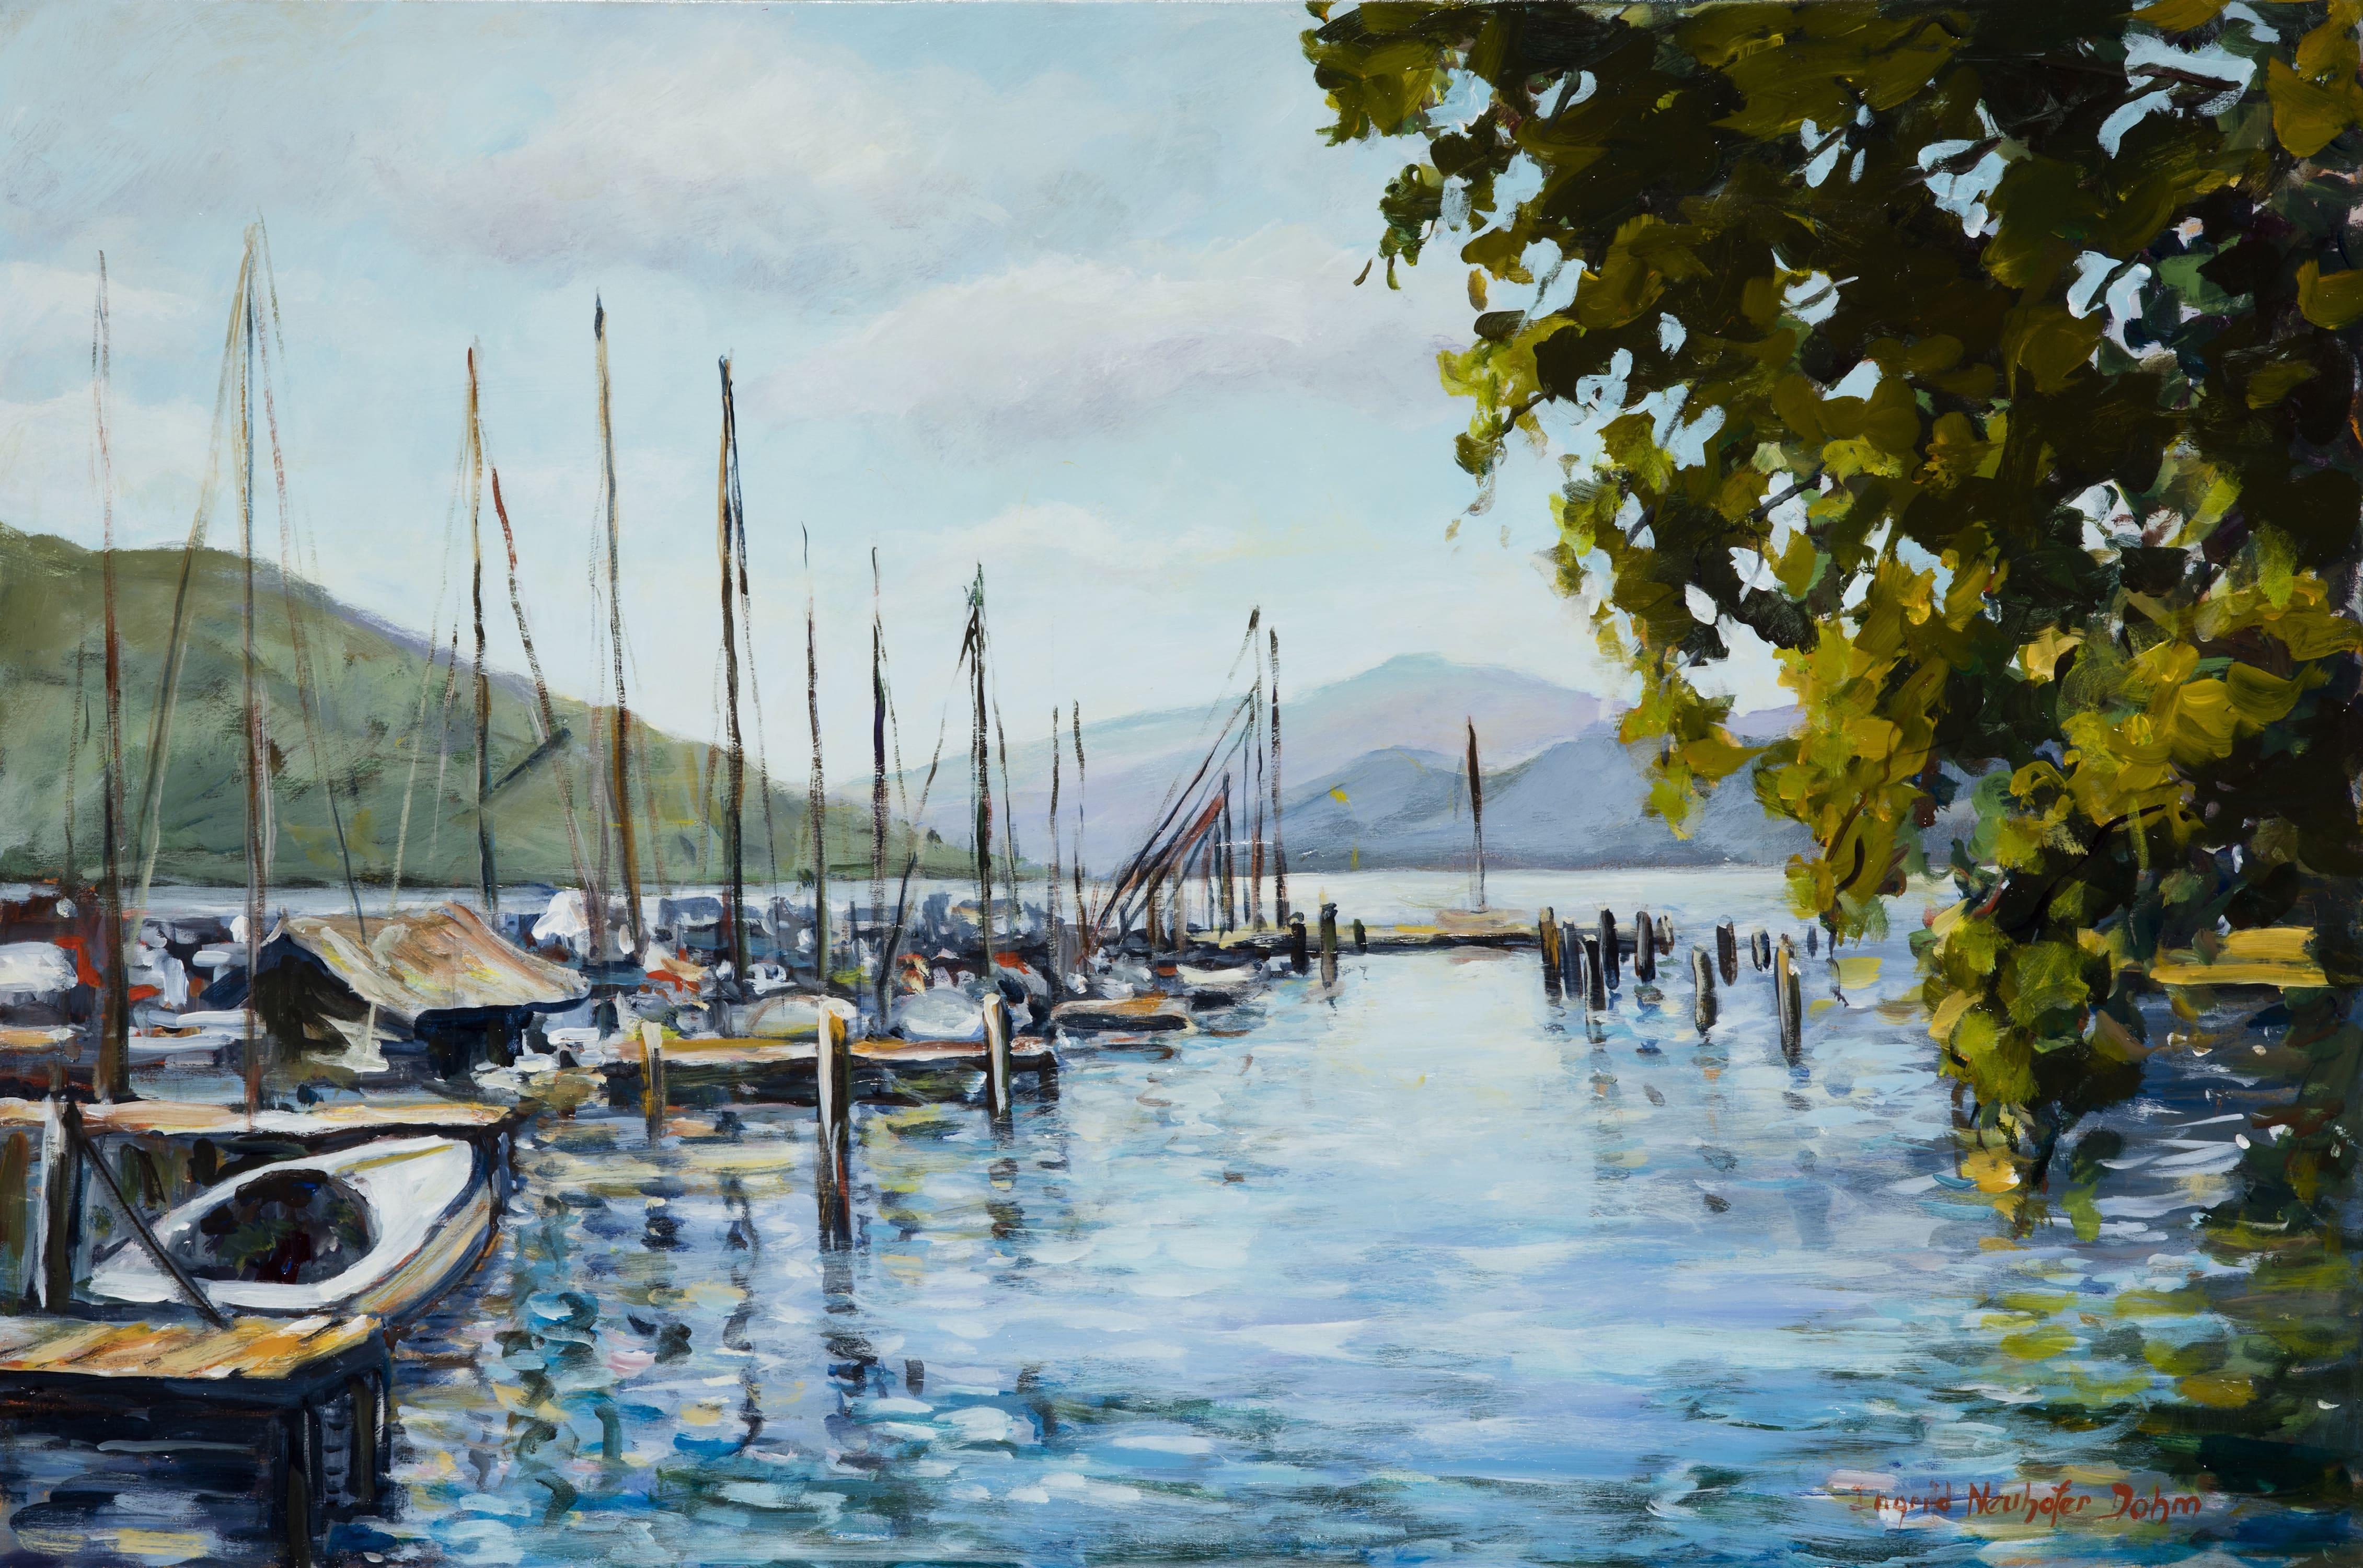 Attersee Austria, Original Contemporary Impressionist Seascape Painting, 2016
24" x 36" x 1.5" (HxWxD) Acrylic on Canvas
Hand-signed by the artist.

Somewhere between a landscape, waterscape, and still life, this work by artist Ingrid Dohm features